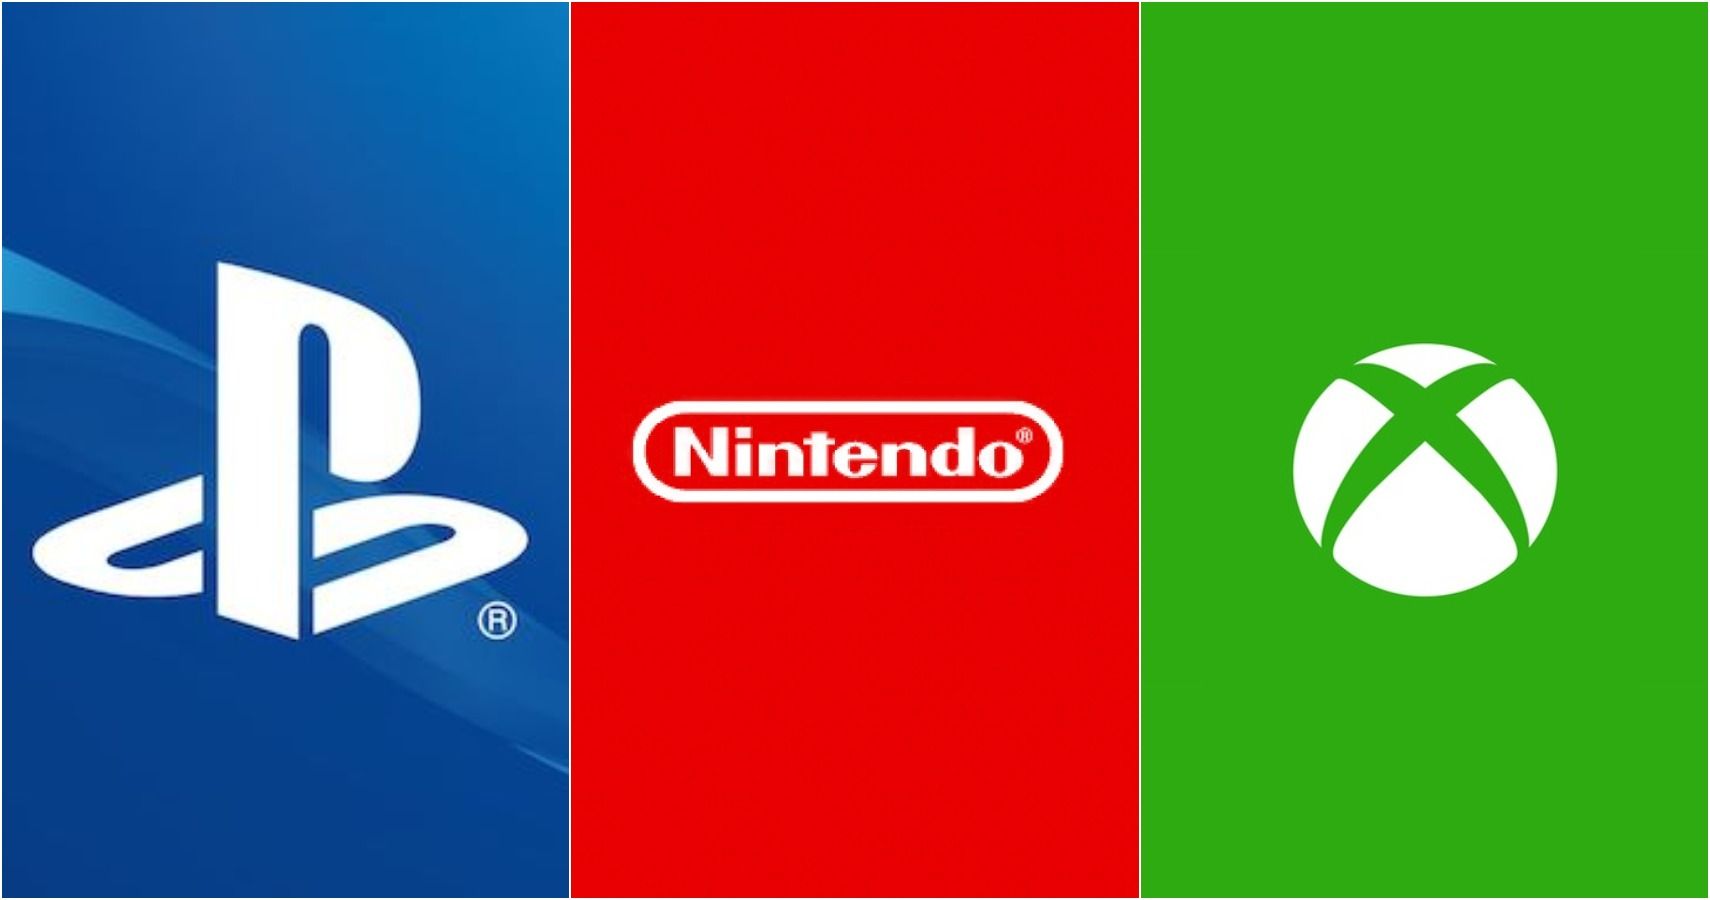 Sony Microsoft And Nintendo Have Banded Together To Oppose Tariffs On Video Game Consoles